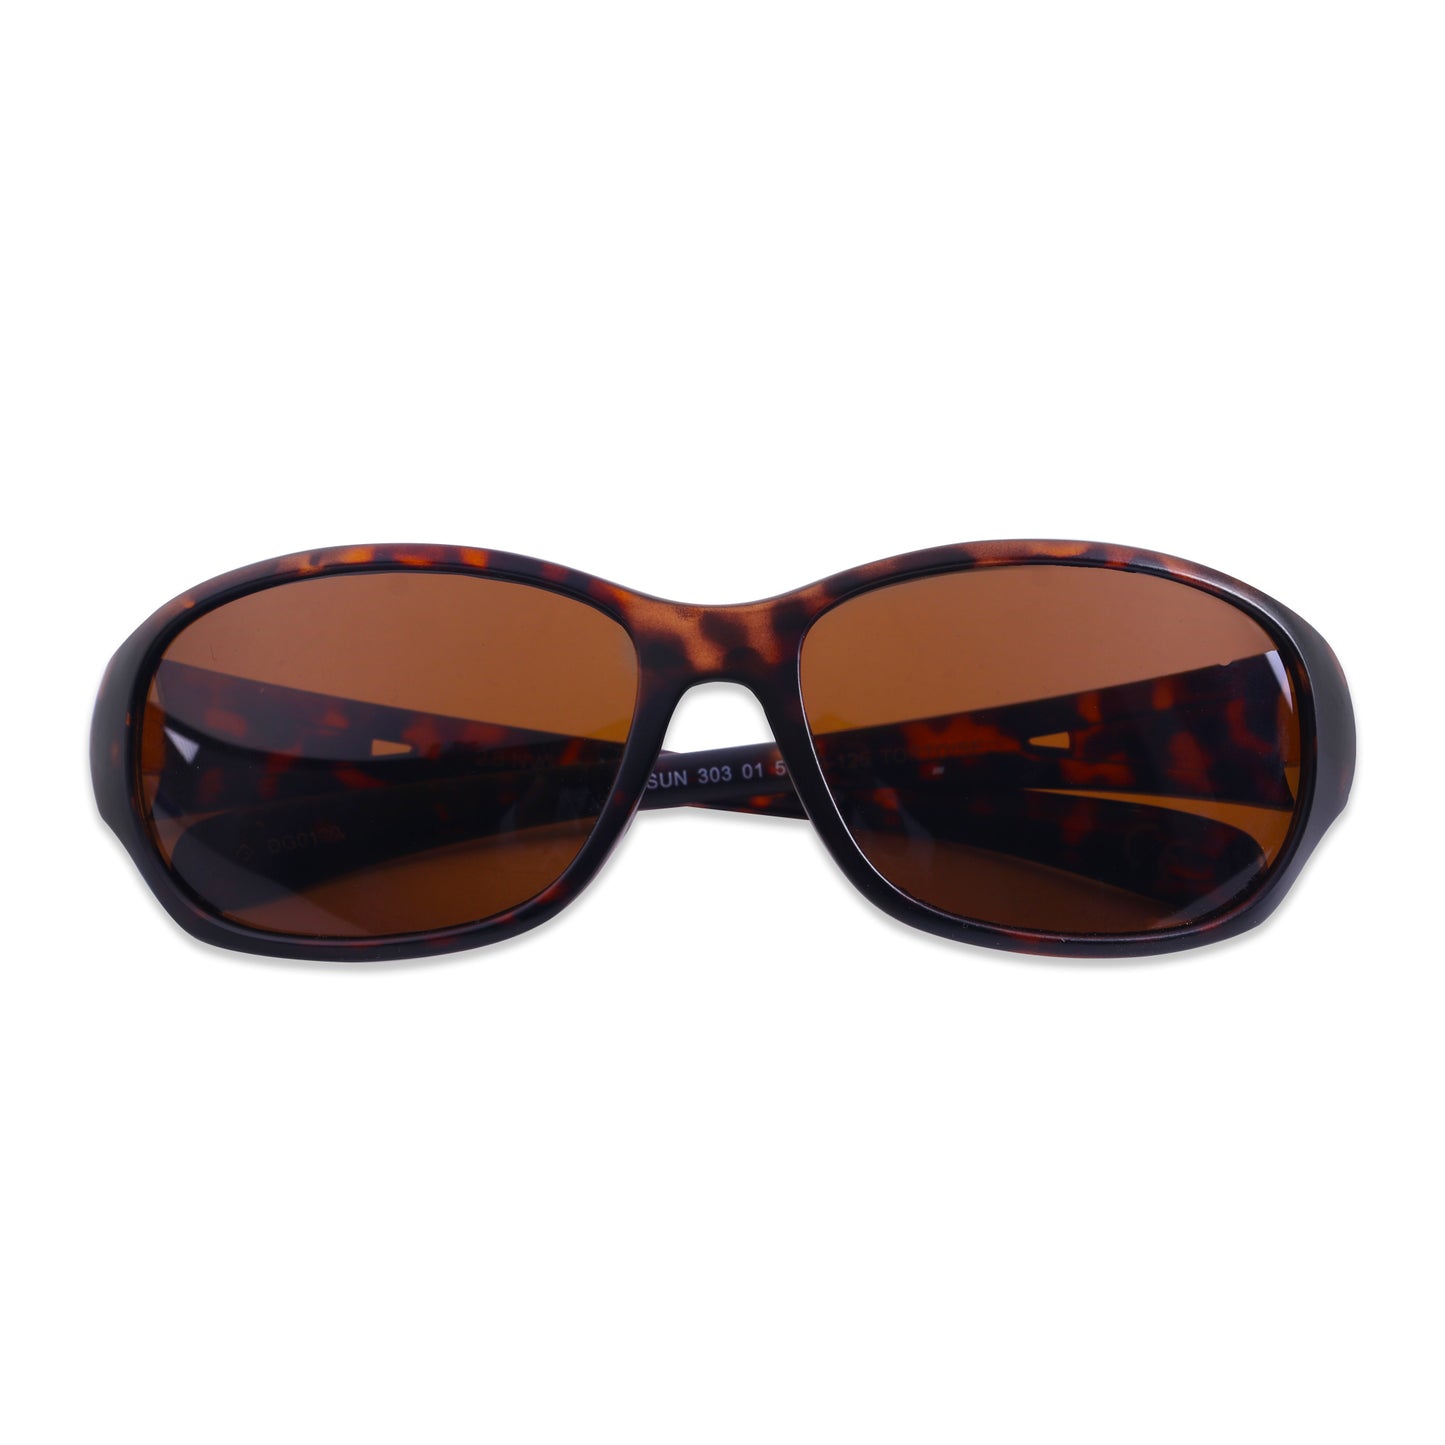 2.5 NVG UV Protected Brown Sports Sunglasses